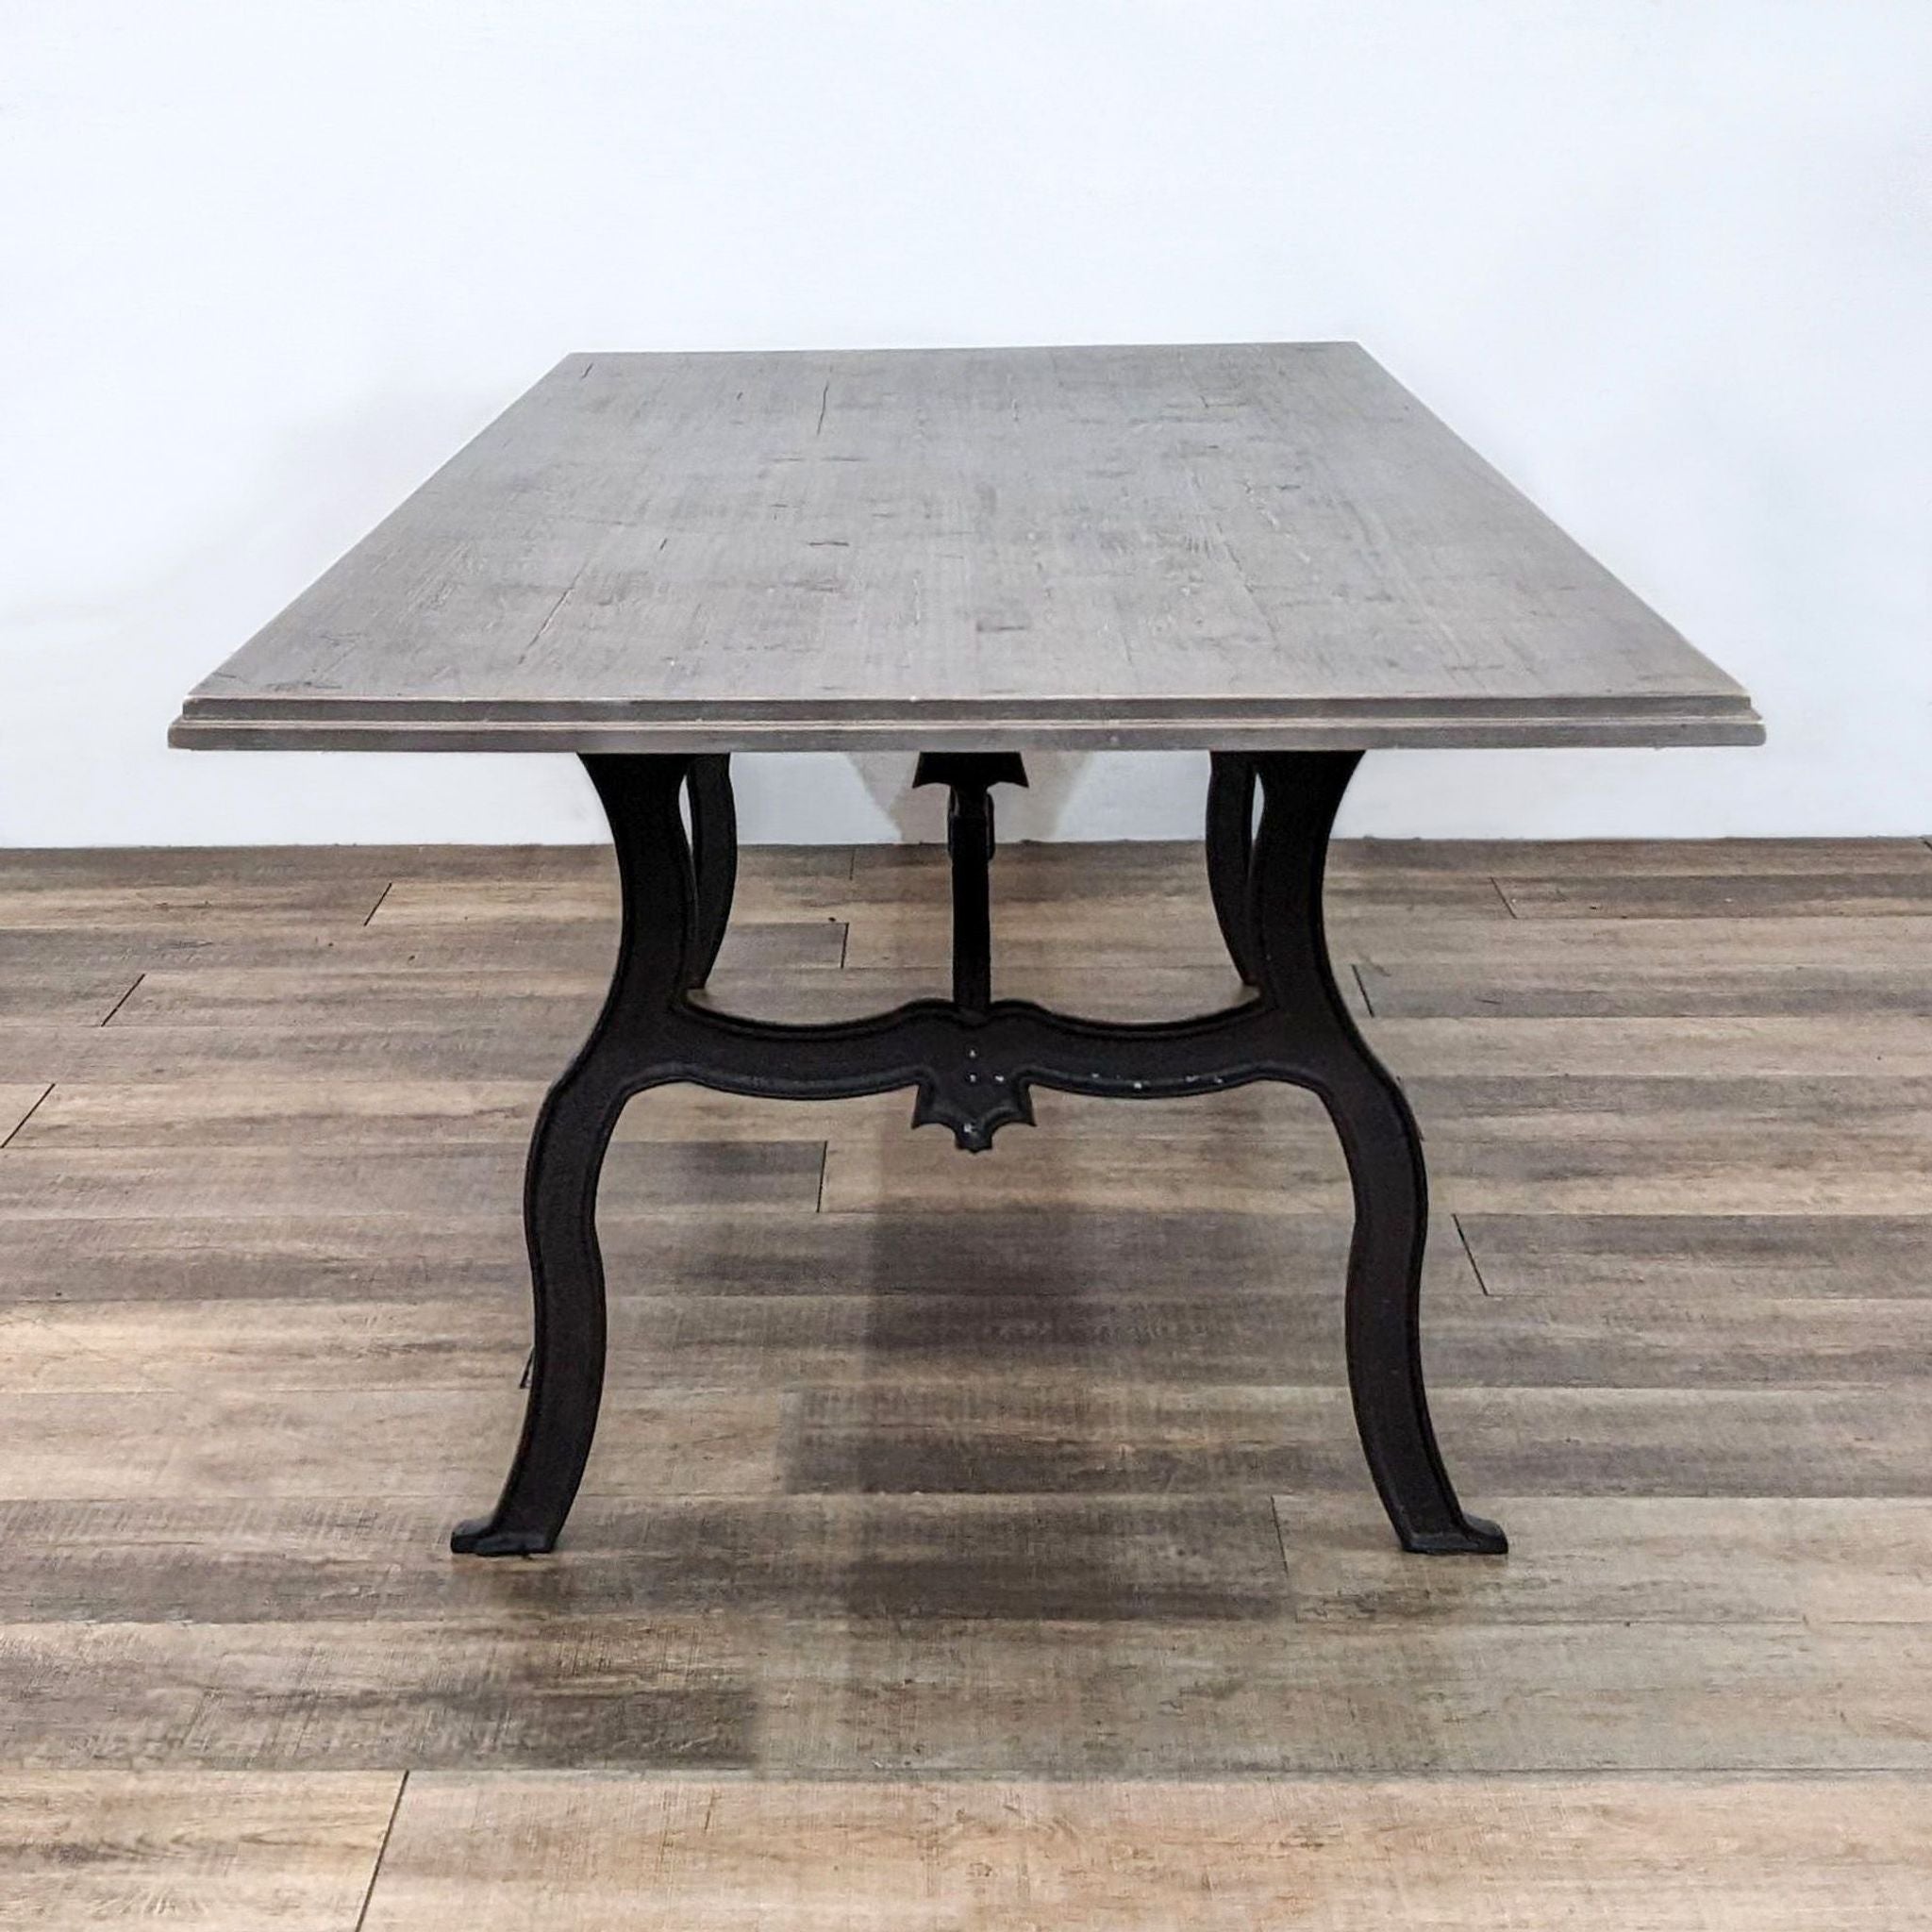 Reperch-brand dining table with scrolled trestle base in black finish and a rectangular distressed fir wood tabletop.